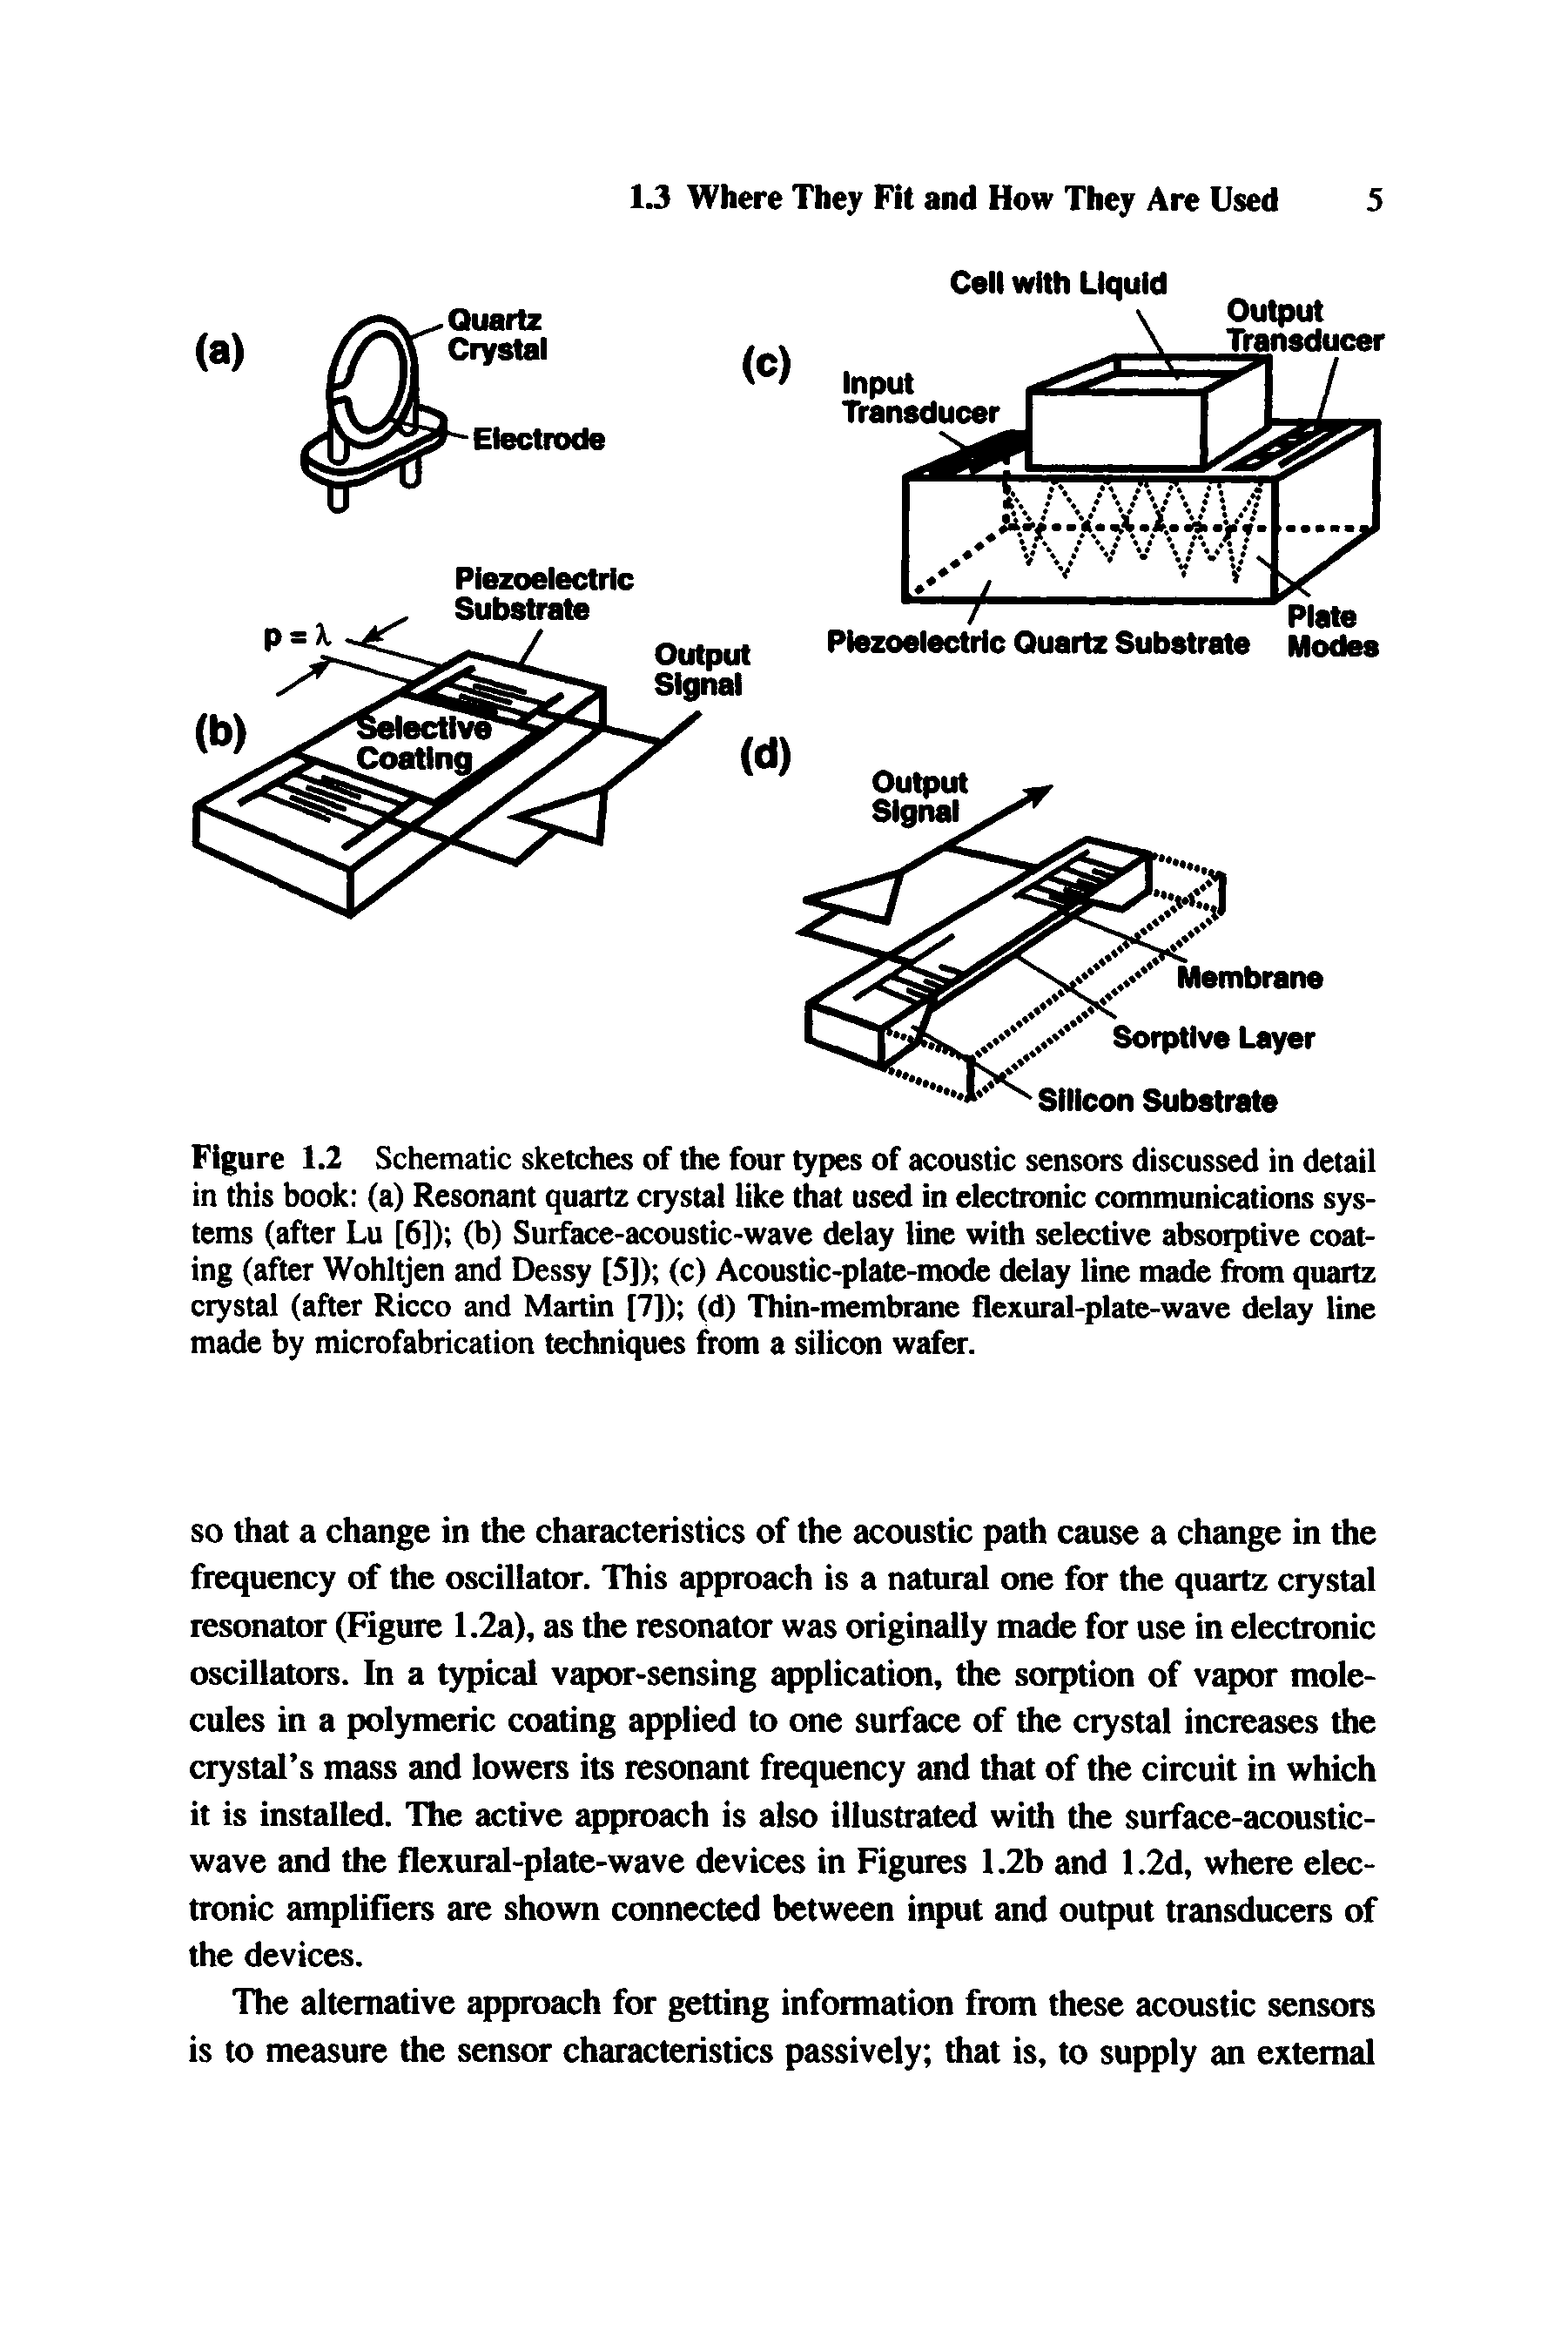 Figure 1.2 Schematic sketches of the four types of acoustic sensors discussed in detail in this book (a) Resonant quartz crystal like that used in electronic communications systems (after Lu [6]) (b) Suiface-acoustic-wave delay line with selective absorptive coating (after Wohltjen and Dessy [3]) (c) Acoustic-plate-mode delay line made from quartz crystal (after Ricco and Martin [7]) (d) Thin-membrane flexural-plate-wave delay line made by microfabrication techniques from a silicon wafer.